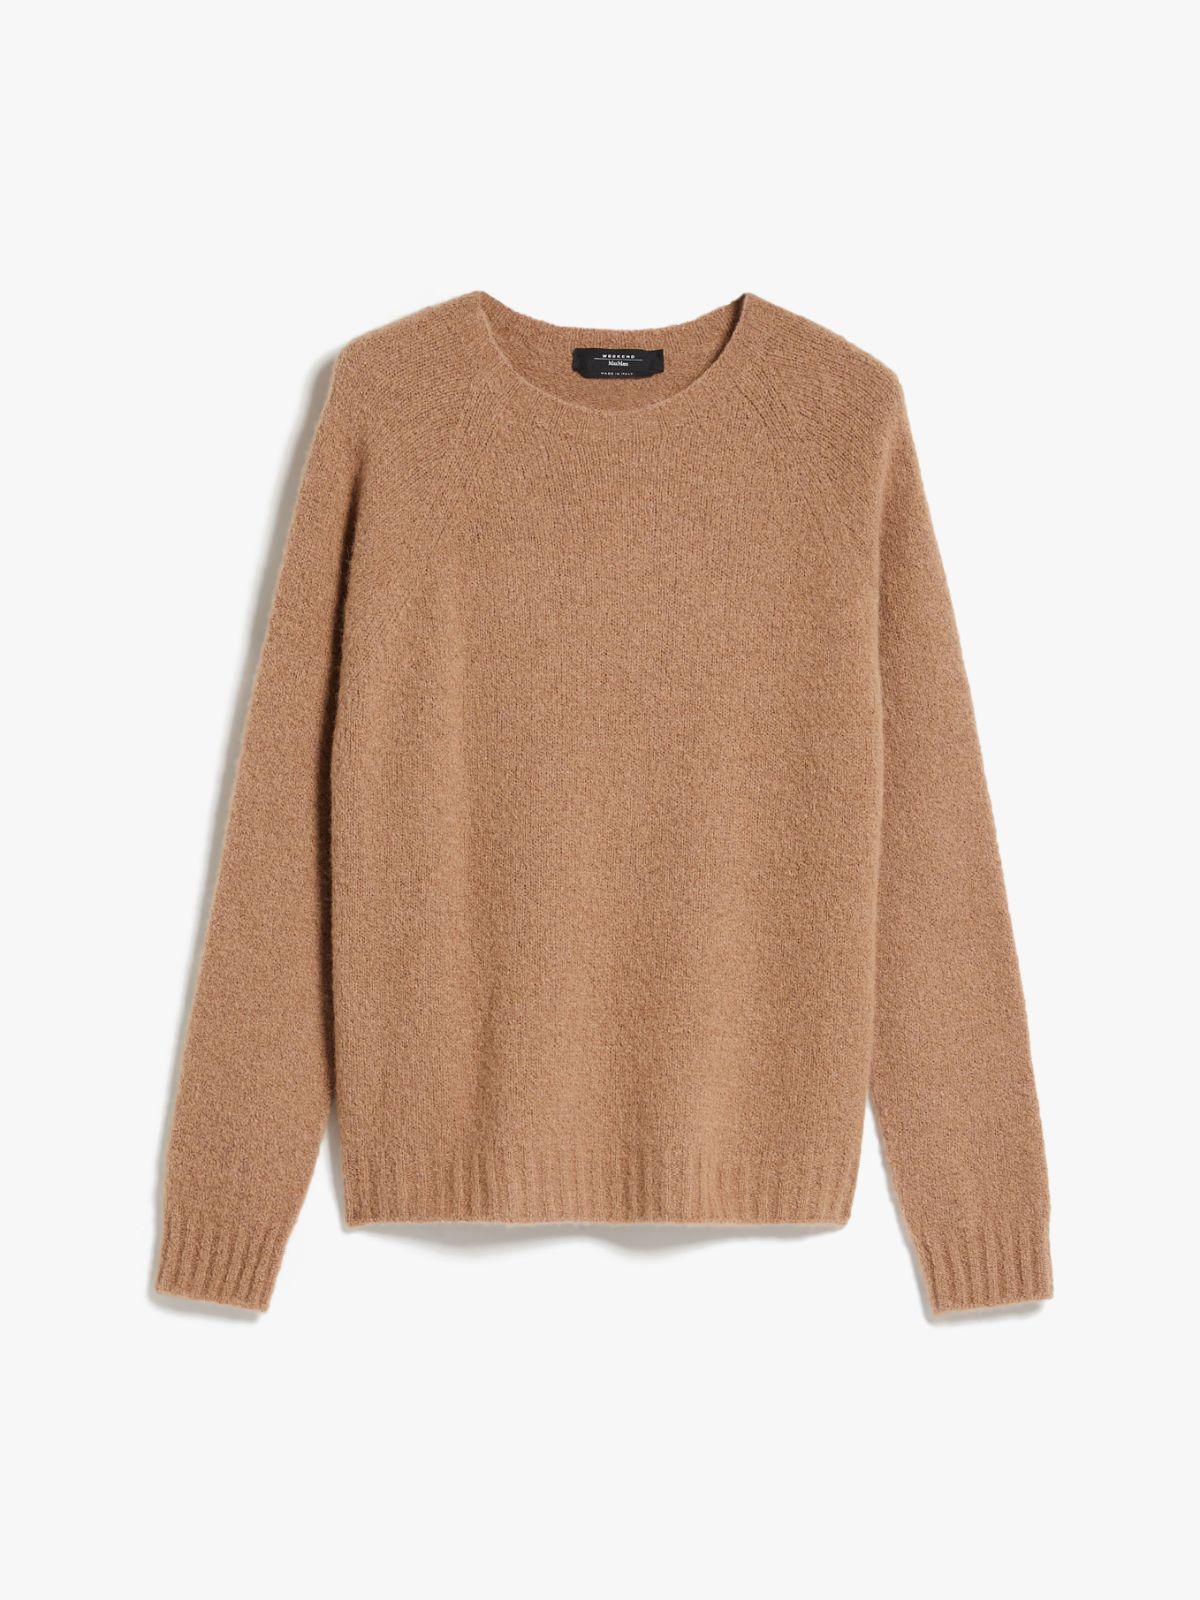 Soft knit top in alpaca and cotton - CAMEL - Weekend Max Mara - 6